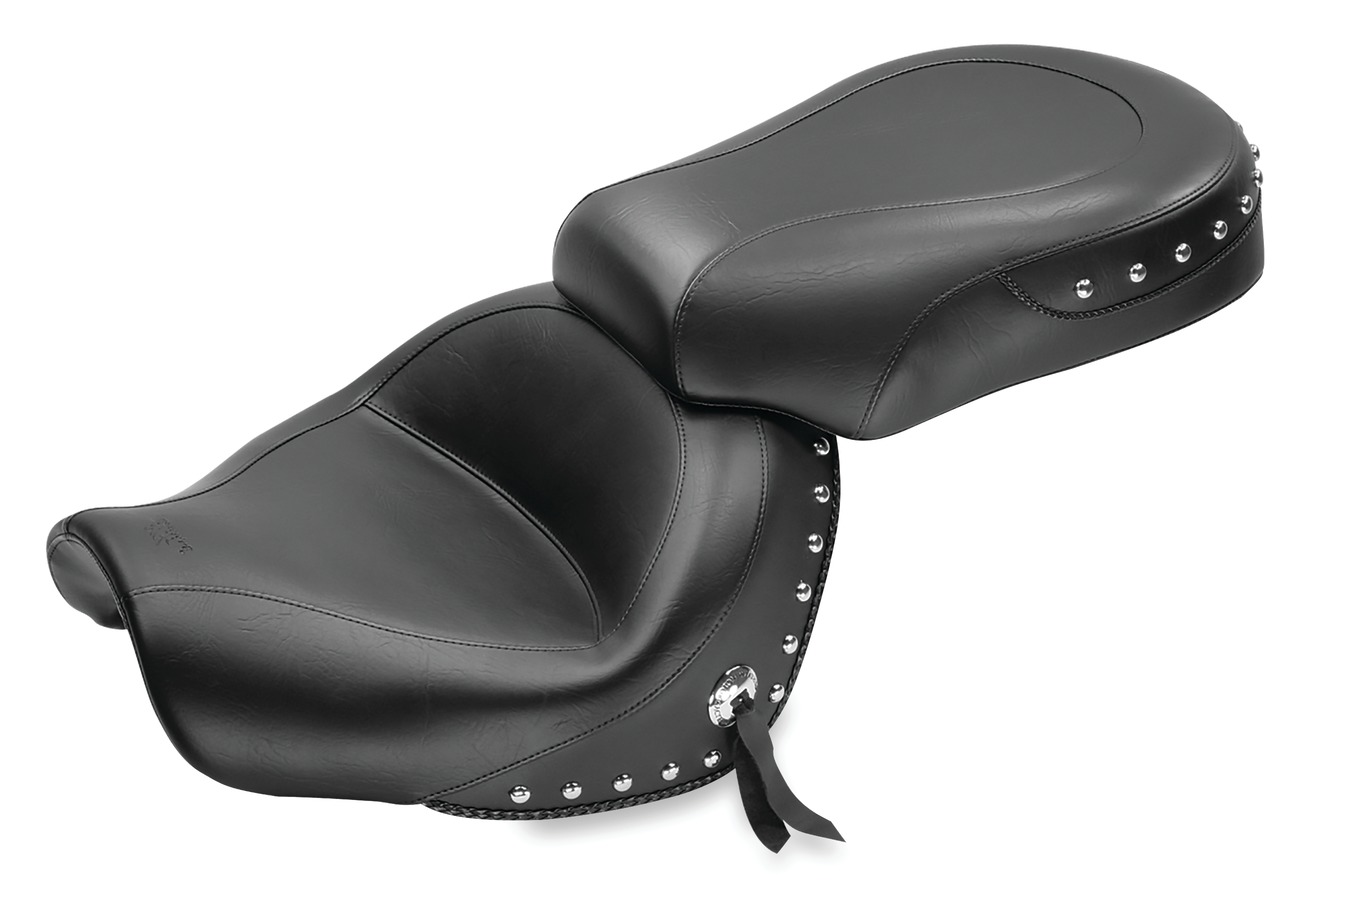 Standard Touring Two-Piece Seat for Yamaha V-Star 950 & 950 Tourer 2009-